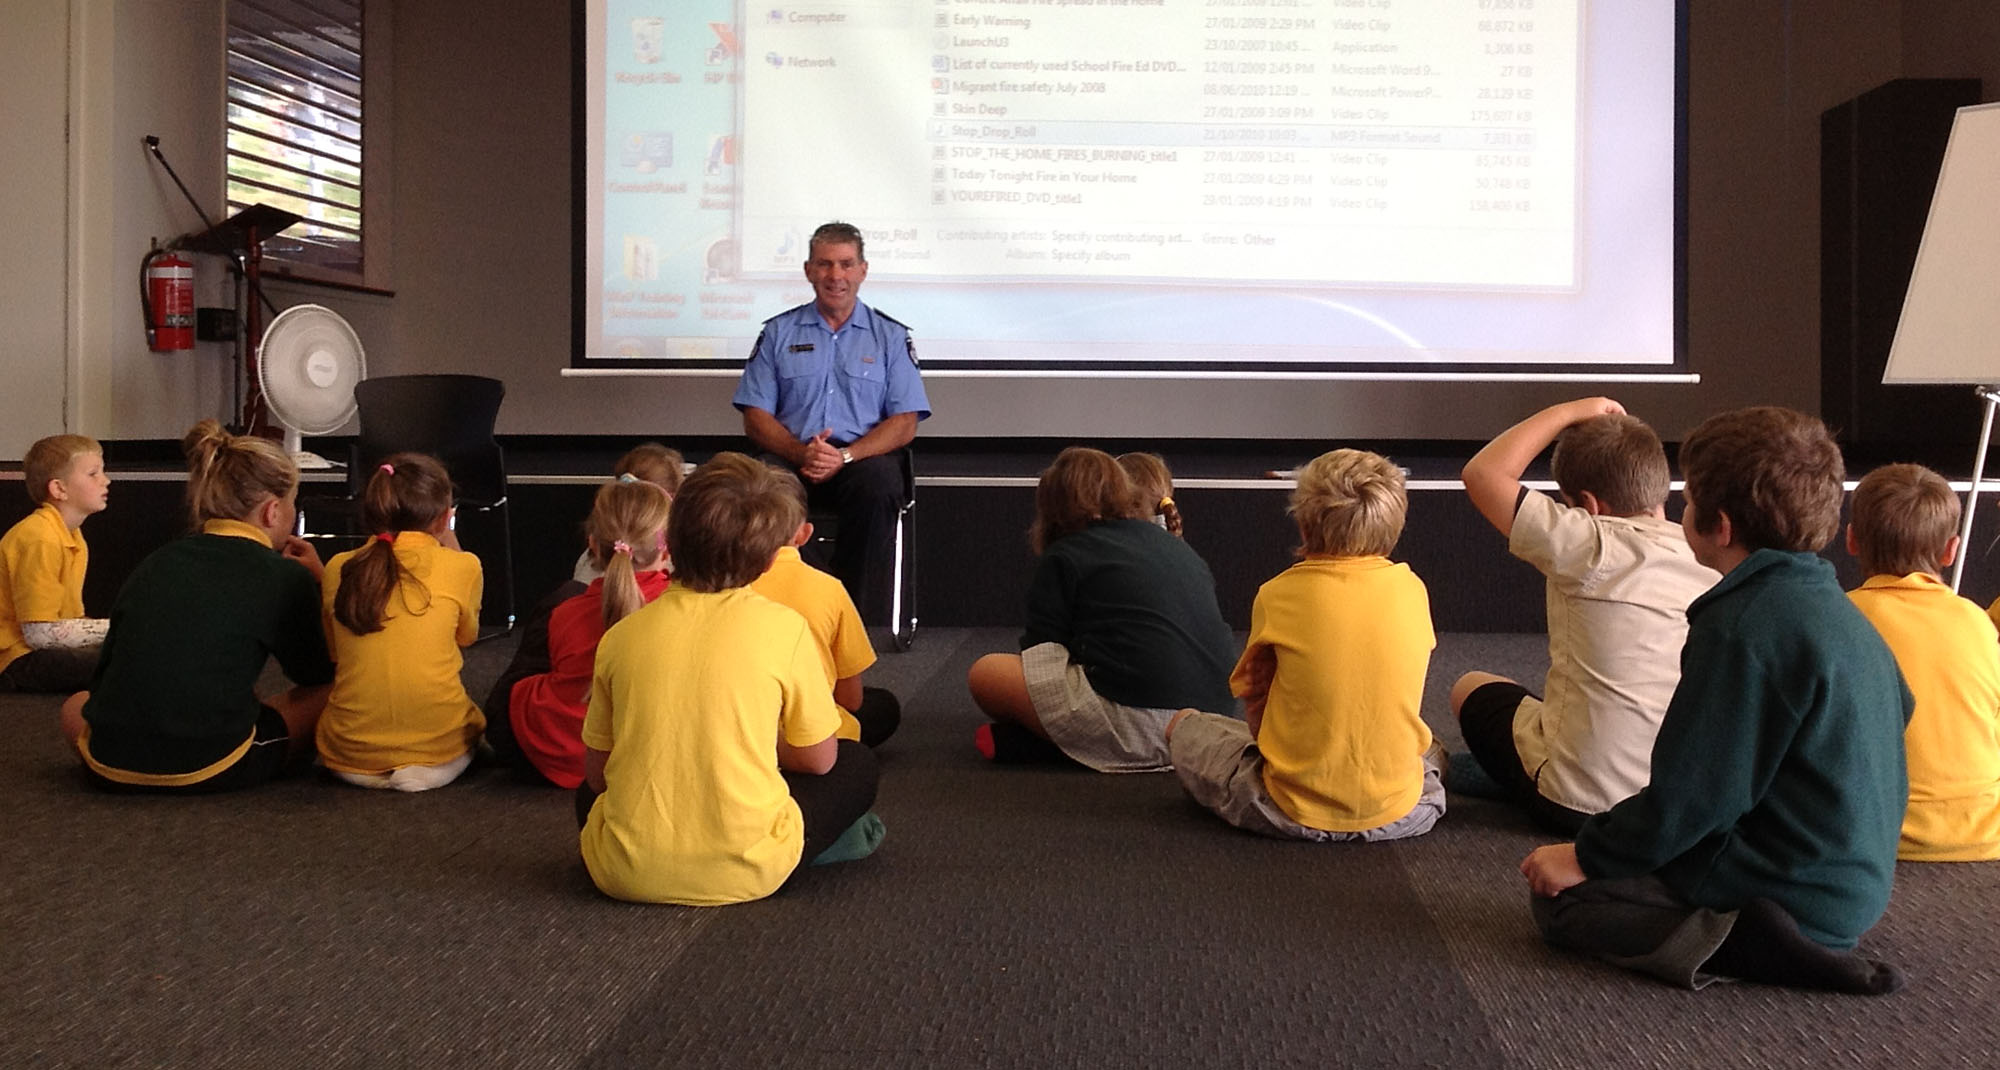 A firefighter is sitting in classroom giving fire safety tips to children sitting in front of him on the floor. A projector screen is seen behind him.